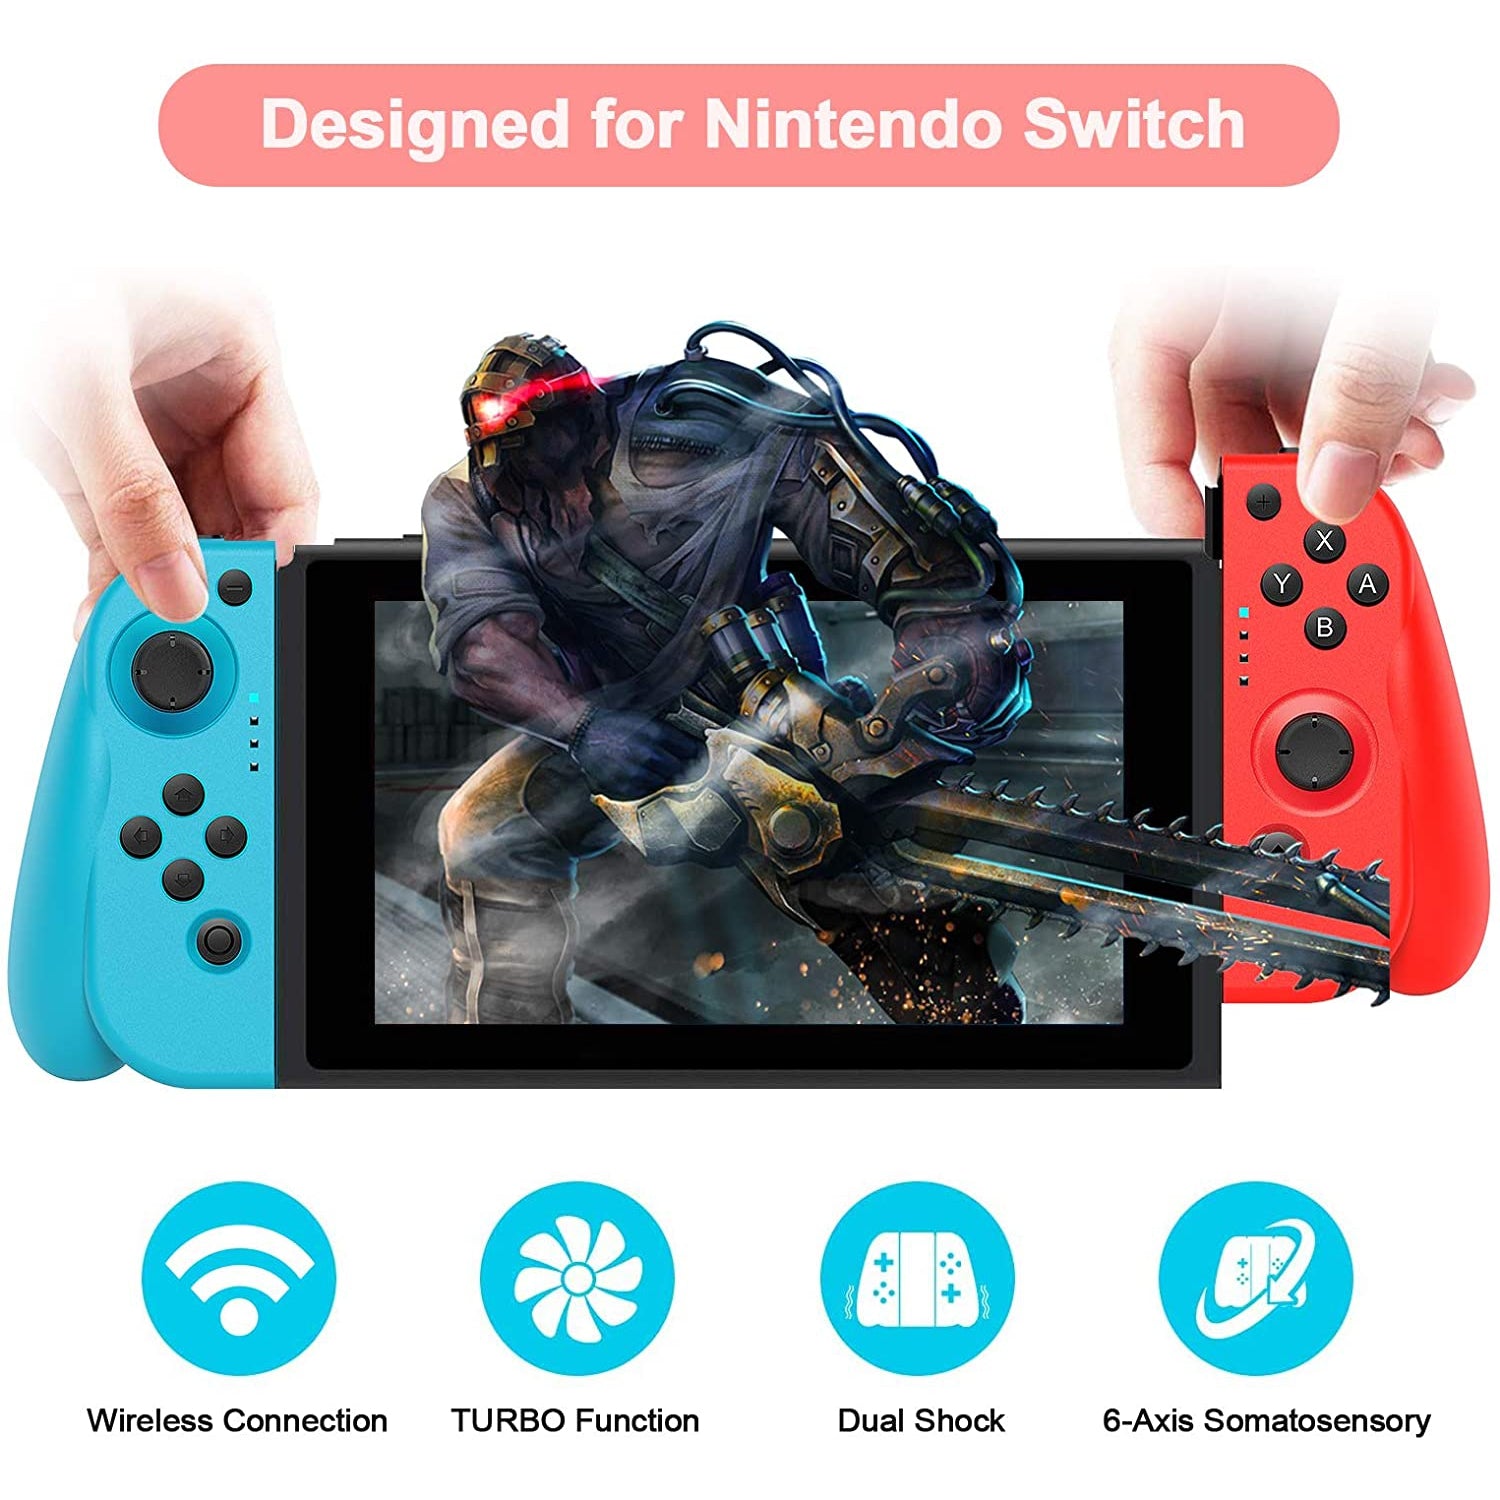 Wireless Controller for Nintendo Switch, Joy-Con Replacement with Redesigned Ergonomic Hand Grip